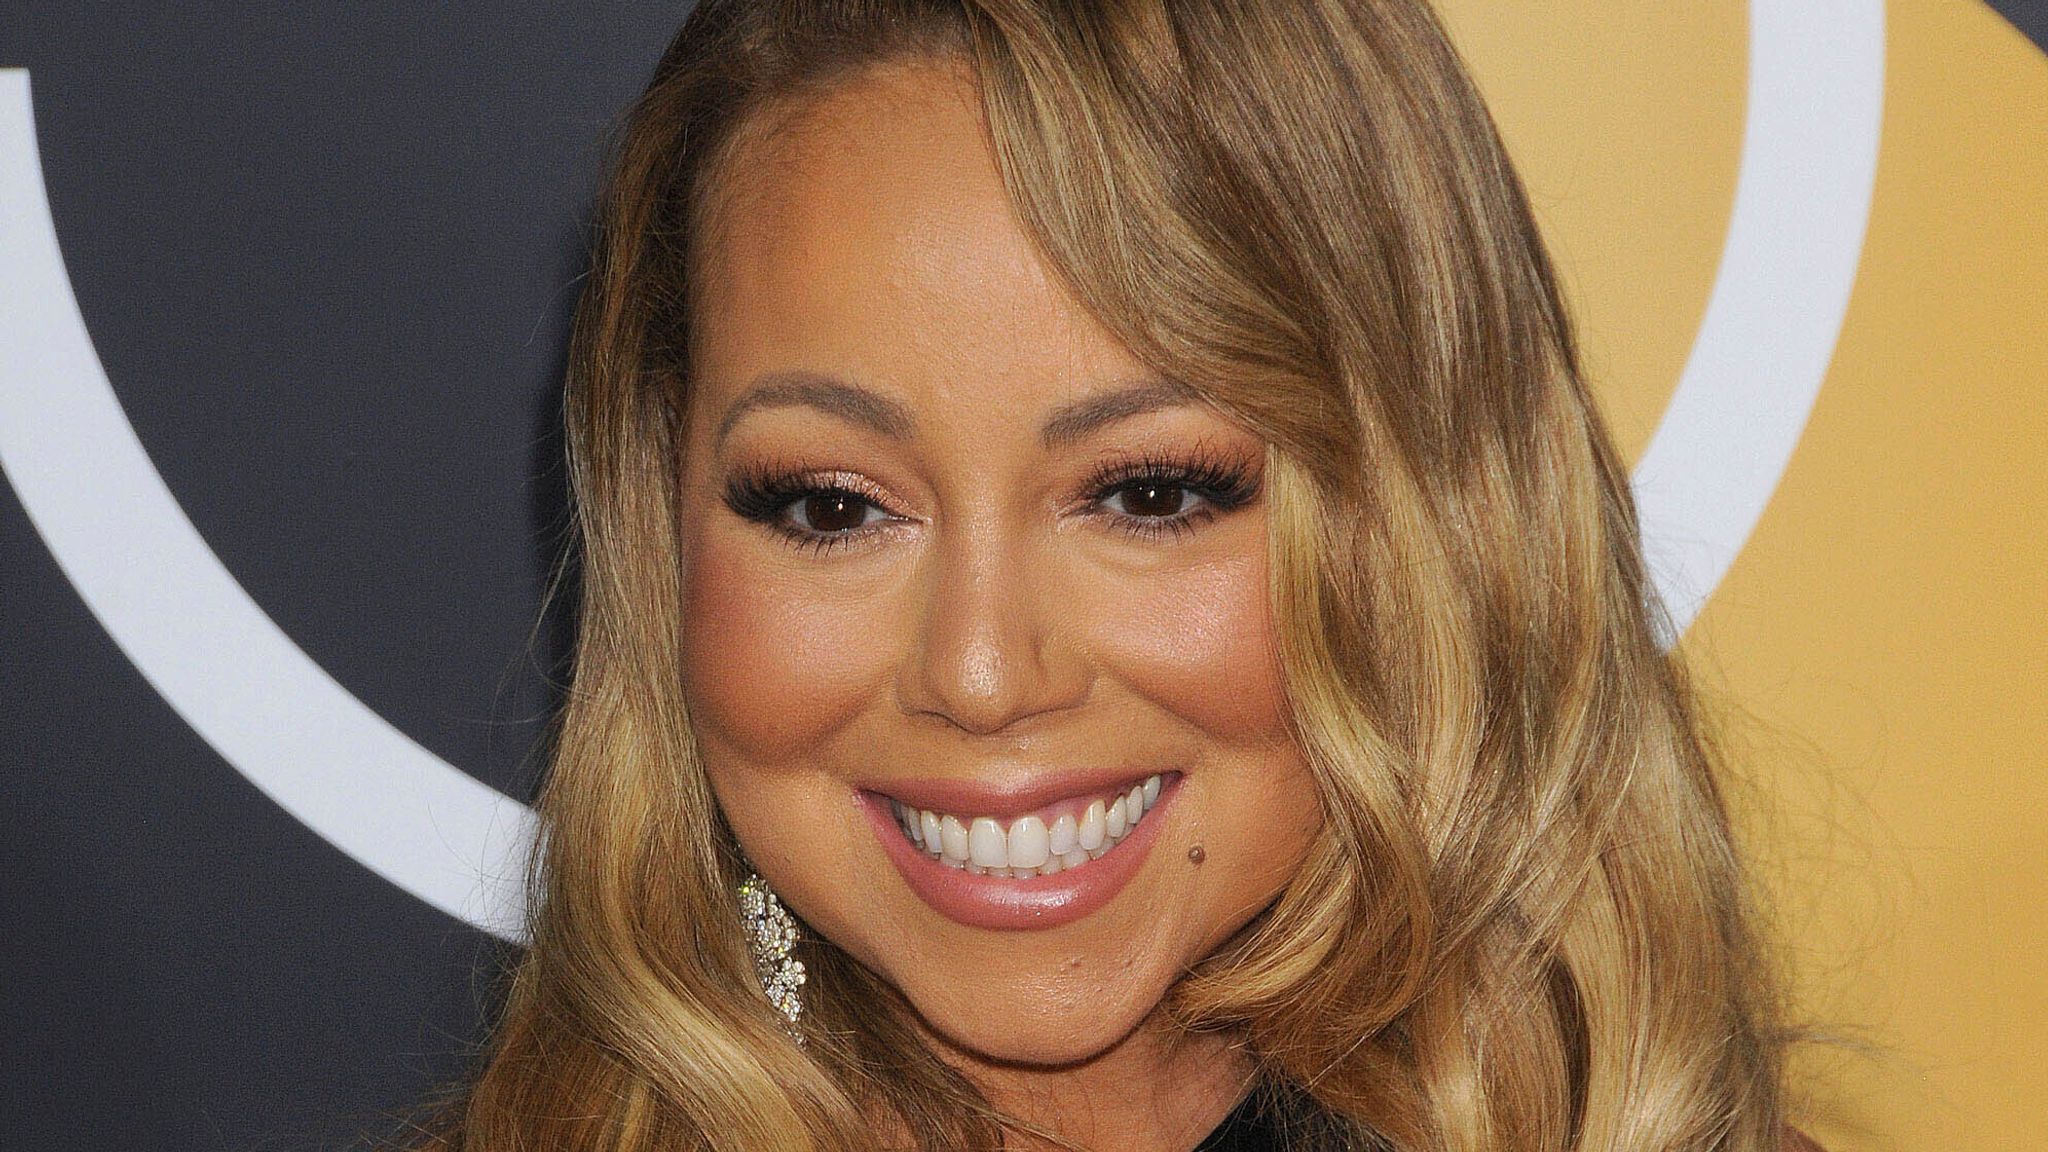 Mariah Carey Sued By Sister For Emotional Distress Over Cruel Claims In Book Ents Arts News Sky News